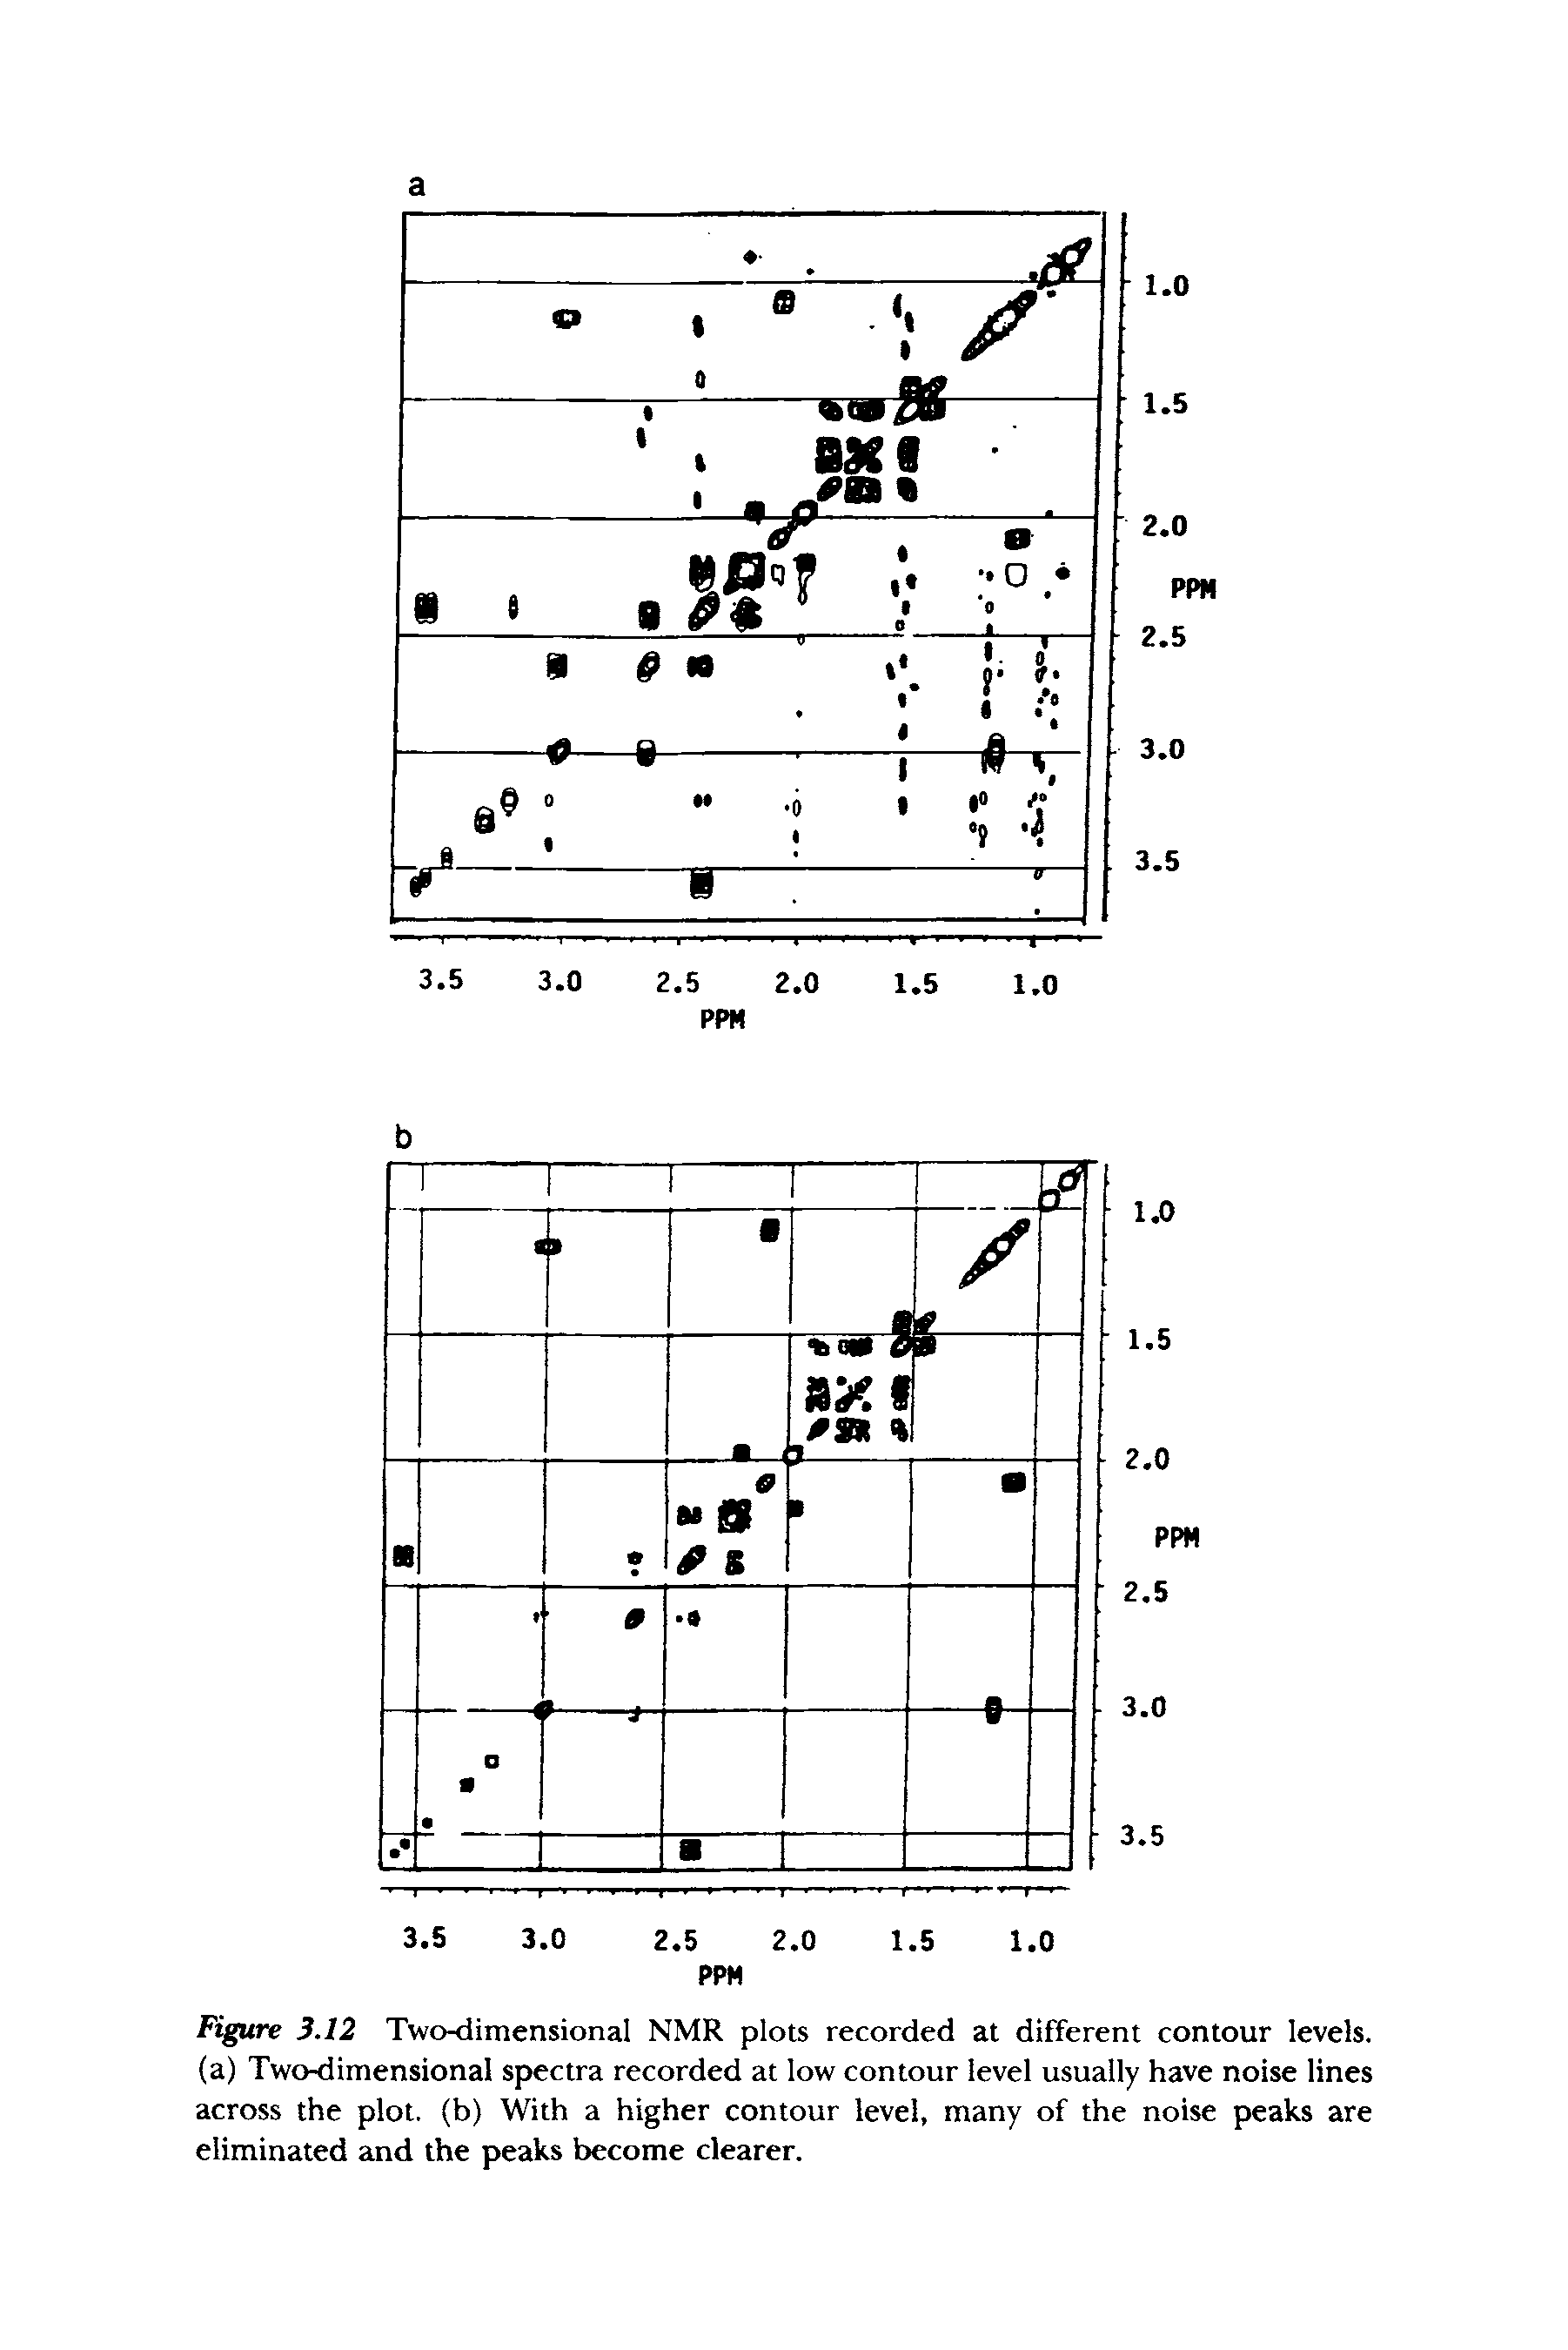 Figure 3.12 Two-dimensional NMR plots recorded at different contour levels, (a) Two-dimensional spectra recorded at low contour level usually have noise lines across the plot, (b) With a higher contour level, many of the noise peaks are eliminated and the peaks become clearer.